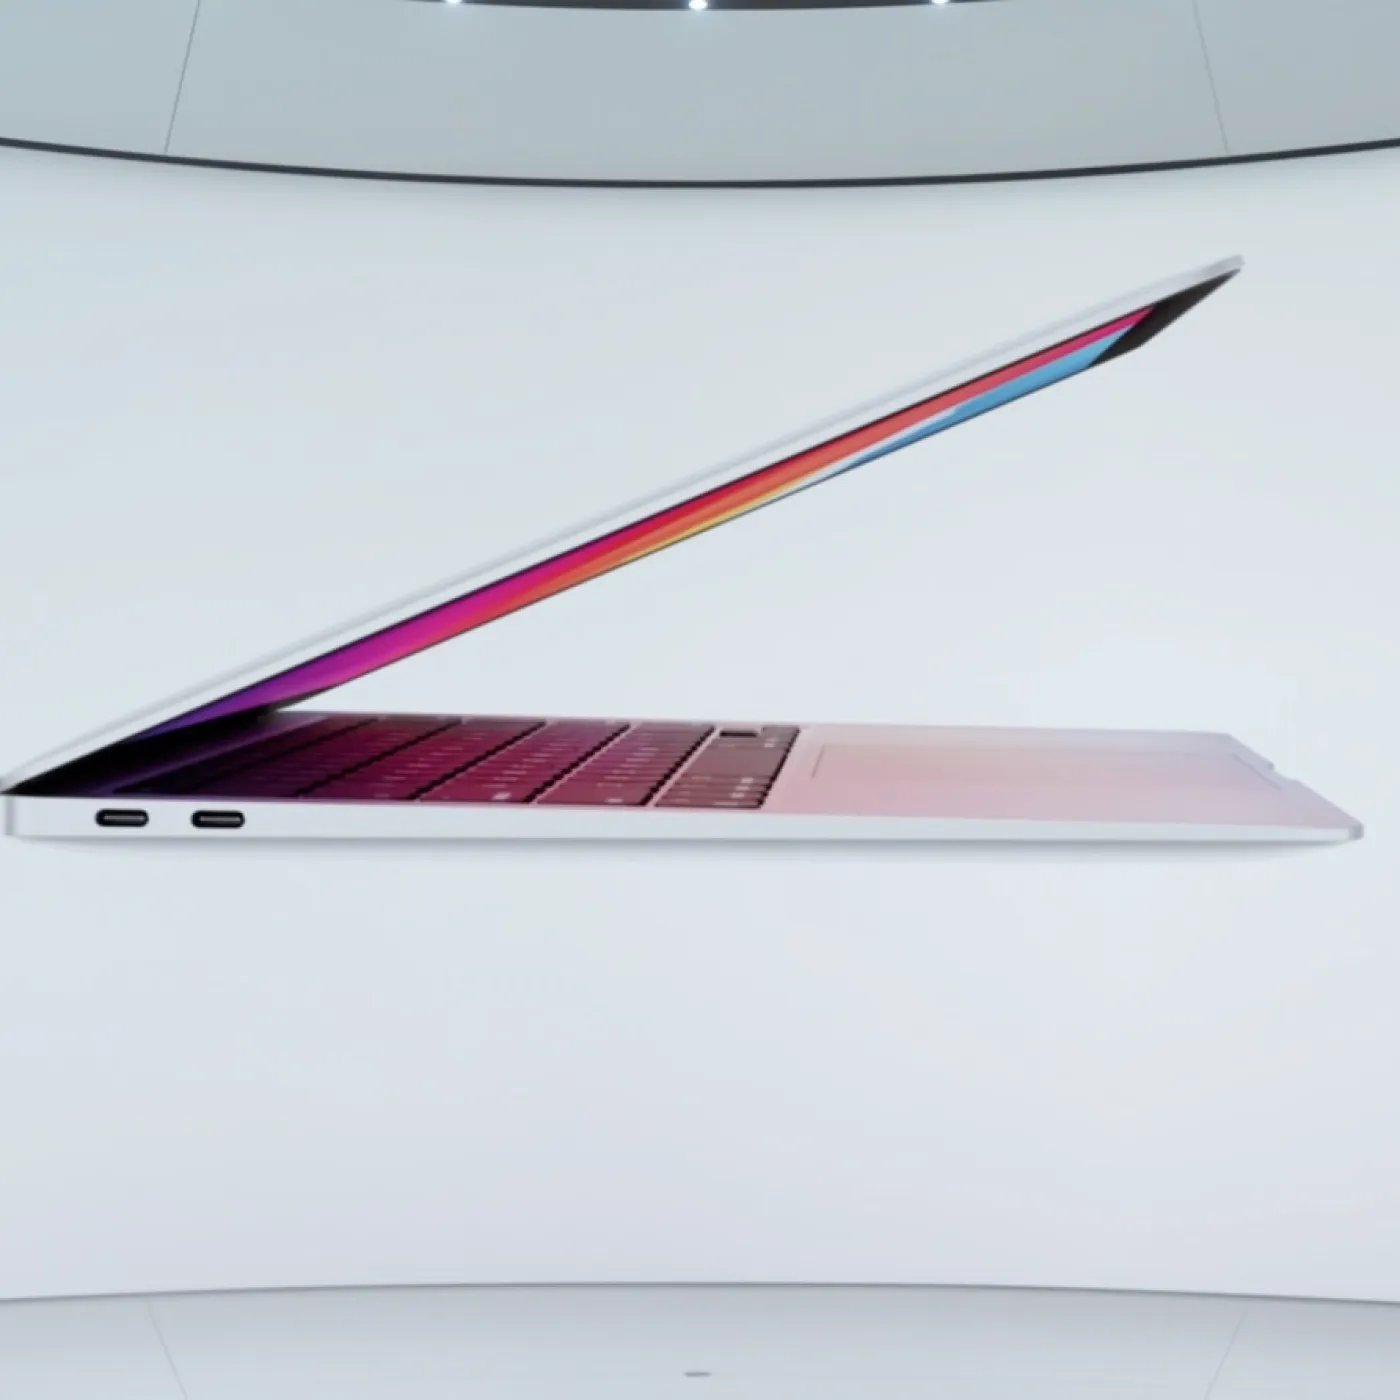 Everything We Know About New 2022 Macs, MacBook Air & More CellularNews